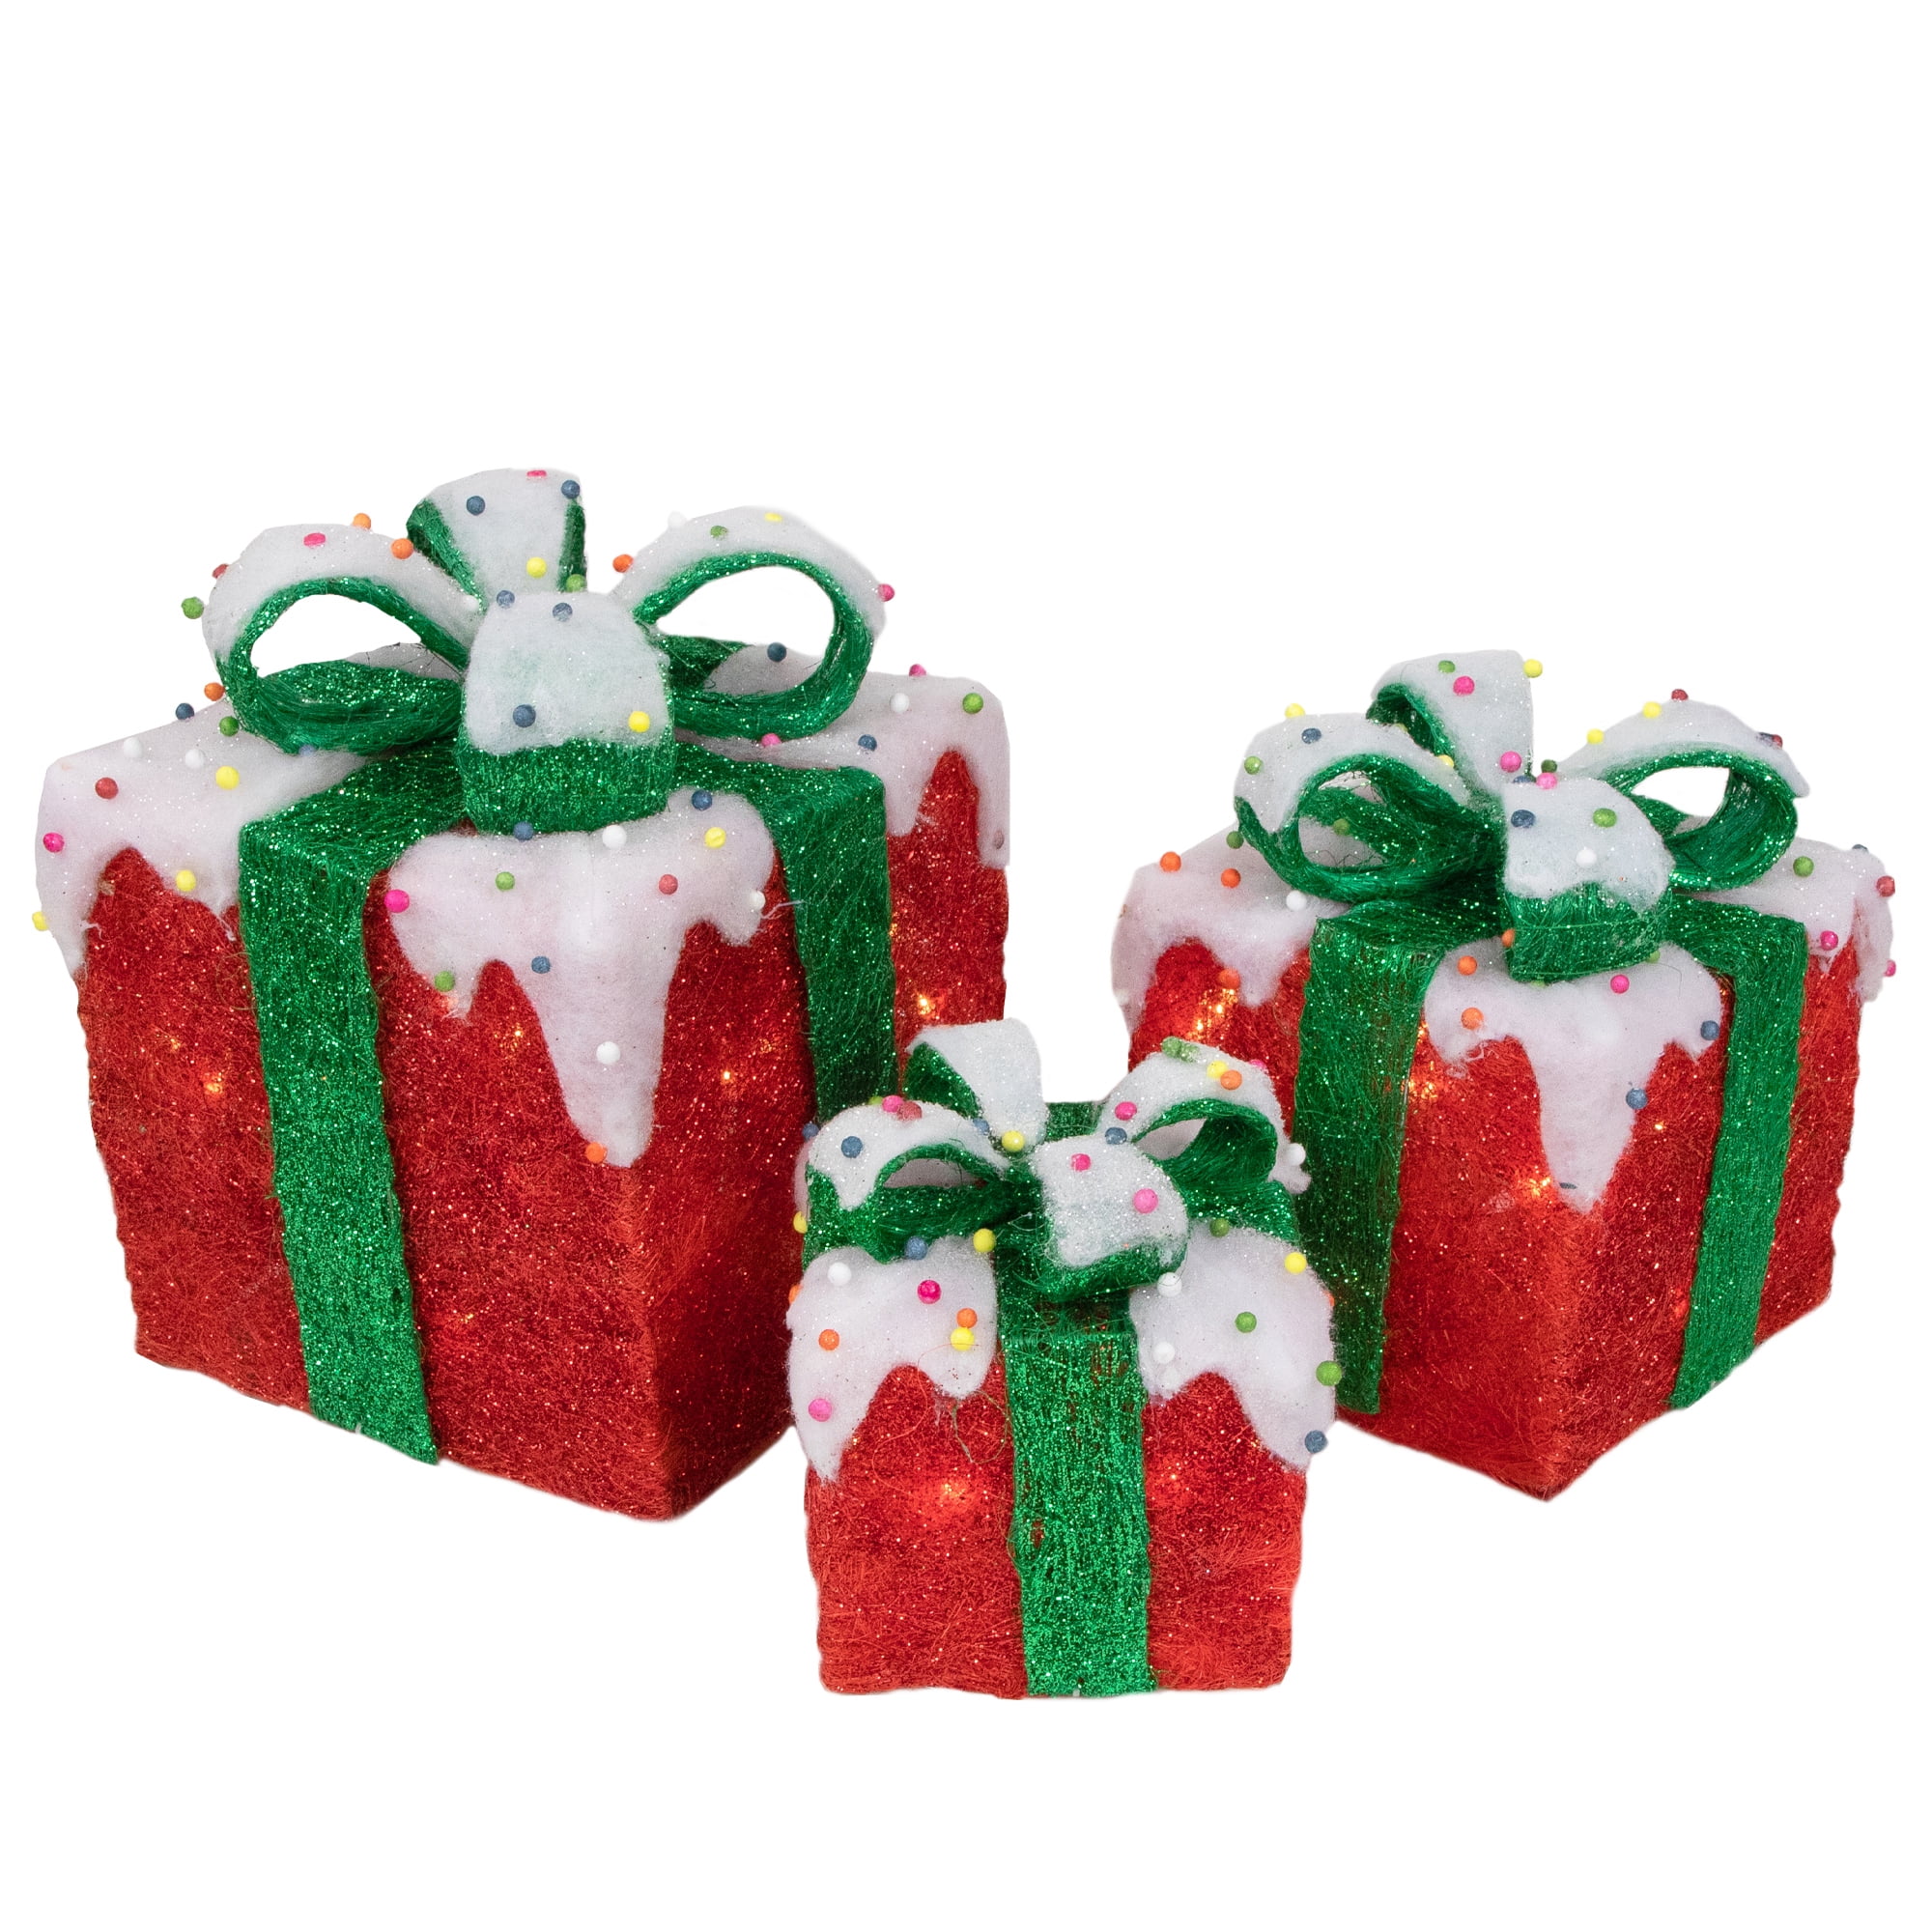 Northlight Set of 3 Lighted Snow and Candy Covered Sisal Gift Boxes ...